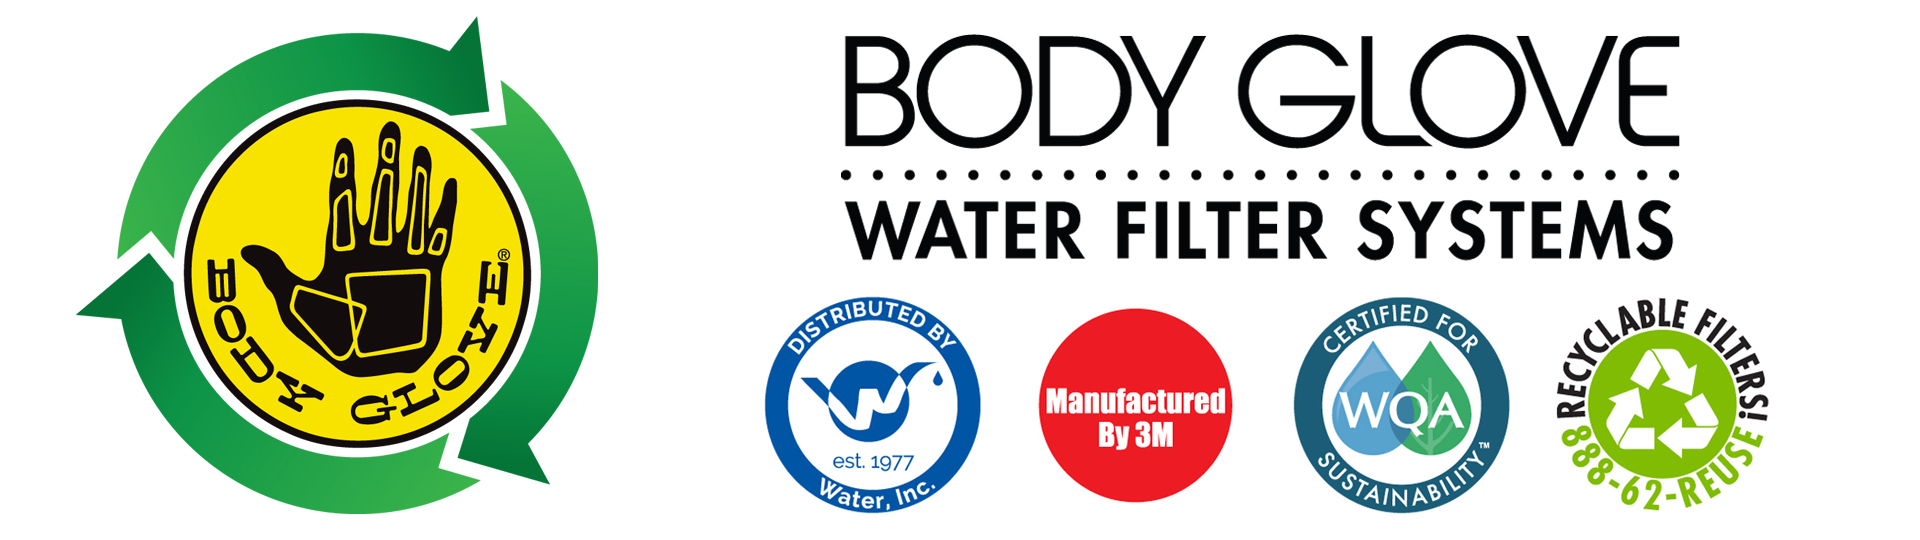 Physique Glove Water Filters And Filtration Systems Eco-friendly, Recyclable Water Filter Systems, Certified For Sustainability, Exclusively From Water, Inc